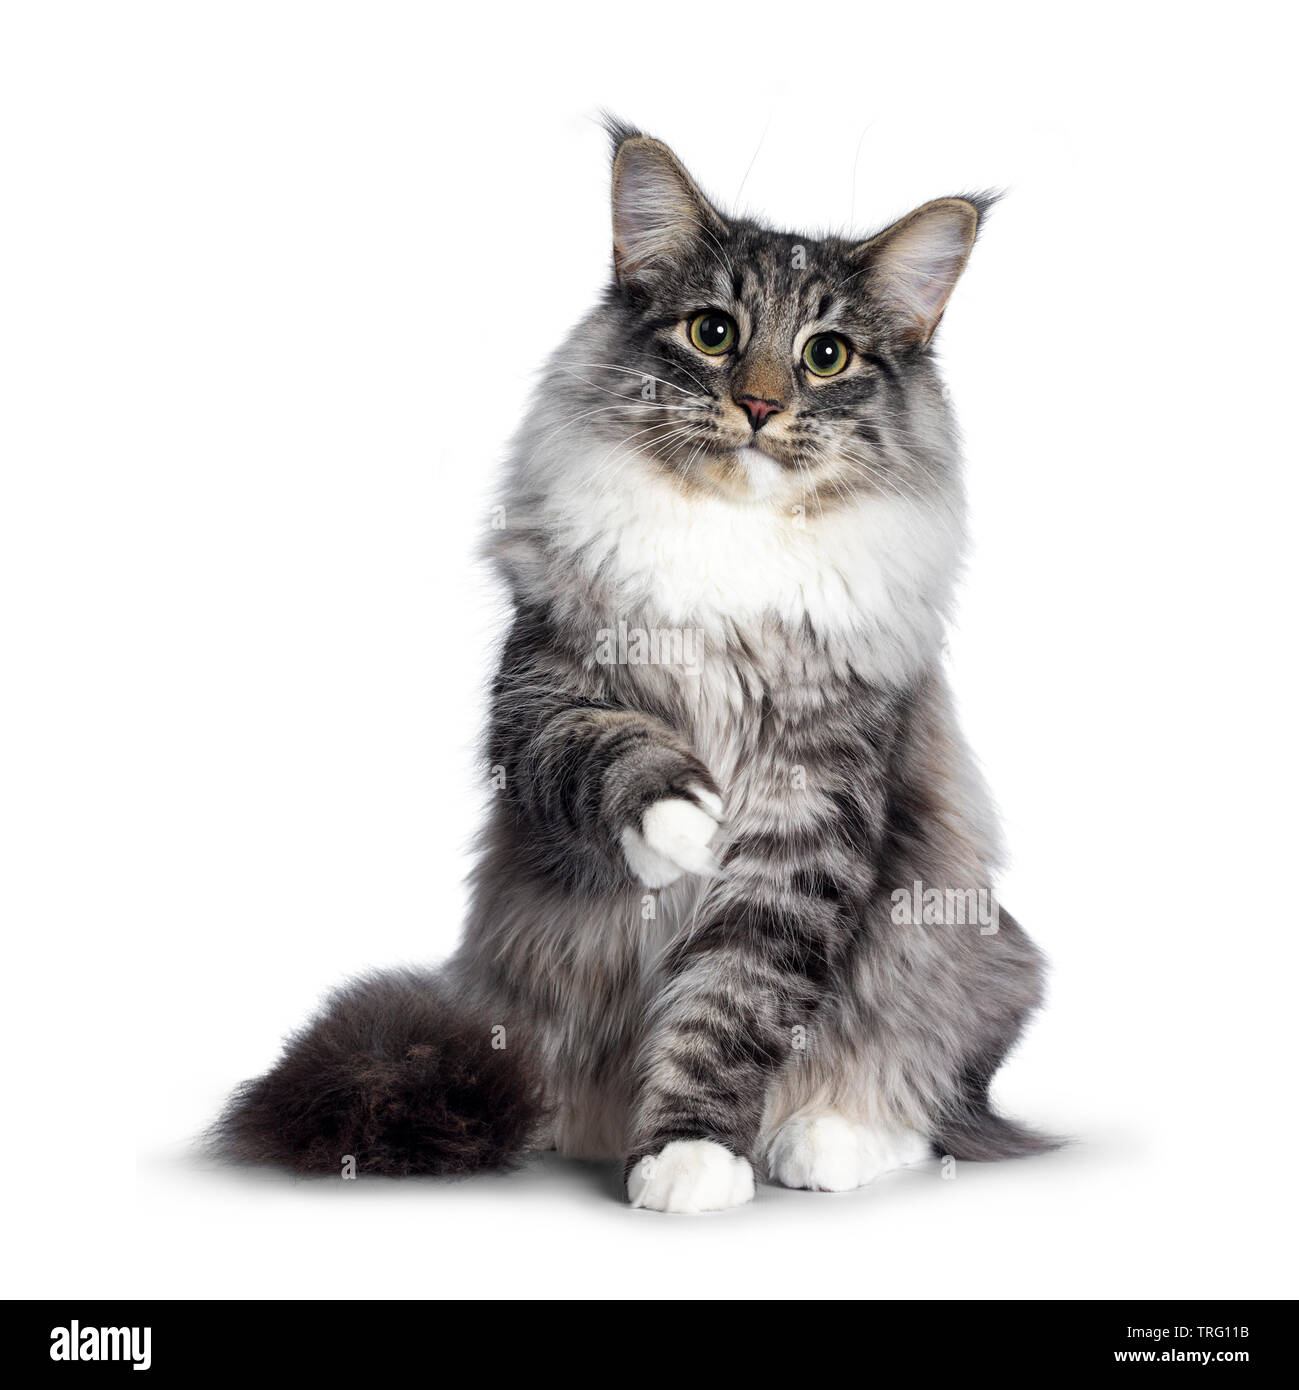 Cute Norwegian Forestcat youngster, sitting facing front. Looking at camera with green / yellow eyes. Isolated on white background. One paw playful in Stock Photo